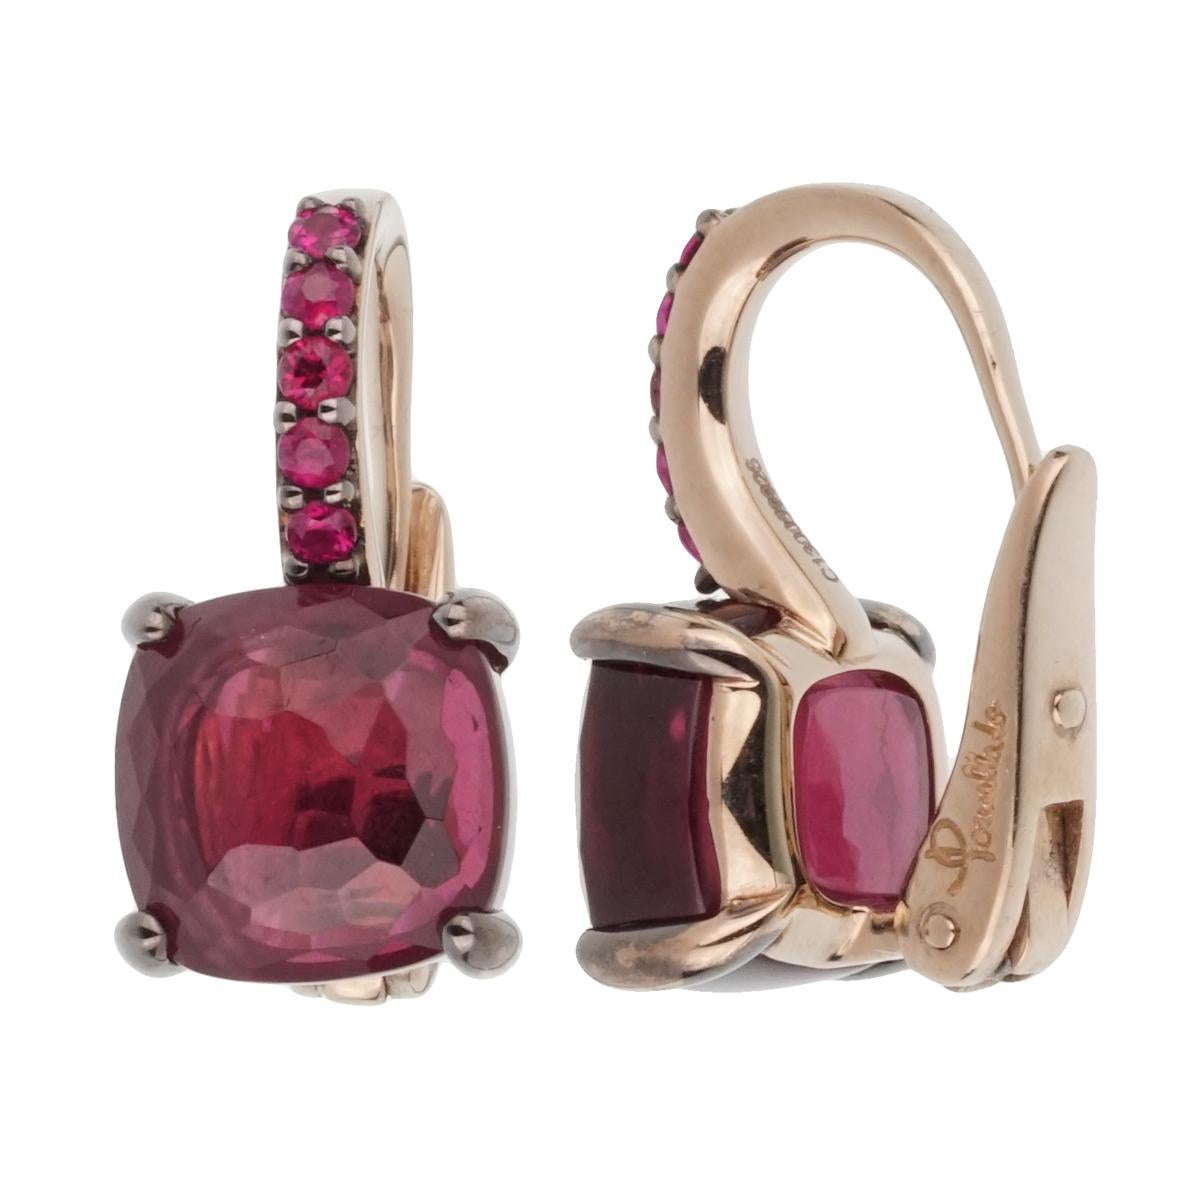 A chic set of brand new Pomellato earrings set with 5.44ct total weight in Rhodolite, adorned by .18ct Ruby in white gold.

Pomellato Retail Price: $8,750
Sku: 2197